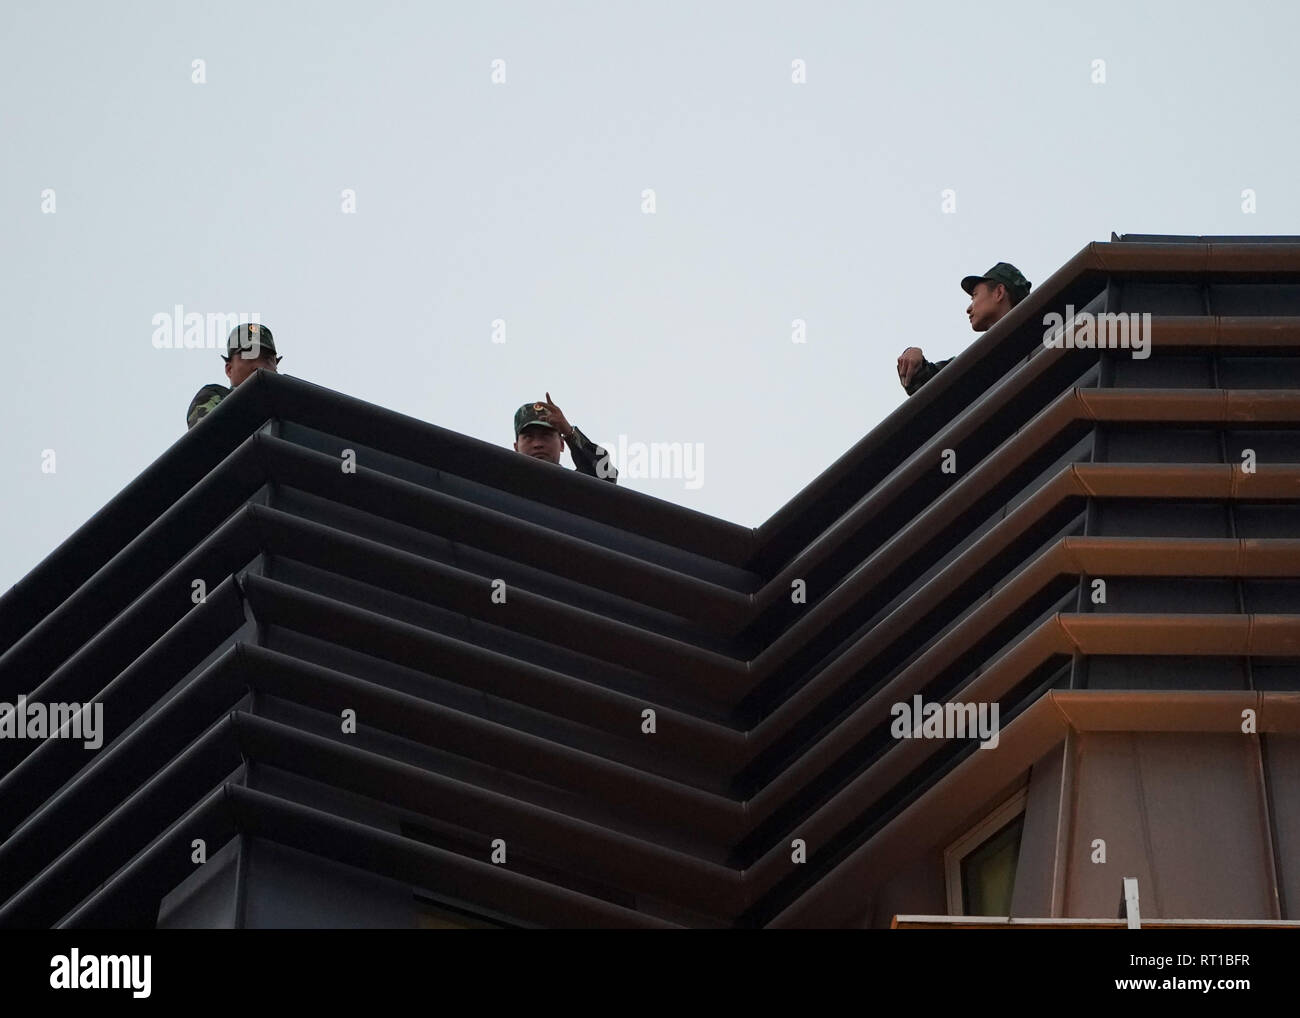 Hanoi, Vietnam. 27th Feb, 2019. February 27, 2019 - Hanoi, Vietnam - Security personnel stand guard on a rooftop next to a the street leading to the Sofitel Legend Metropole hotel where North Korean Leader Kim Jong Un and U.S. President Donald Trump met for dinner during the second North Korea-U.S. Summit in the capital city of Hanoi, Vietnam. Credit: Christopher Jue/ZUMA Wire/Alamy Live News Stock Photo